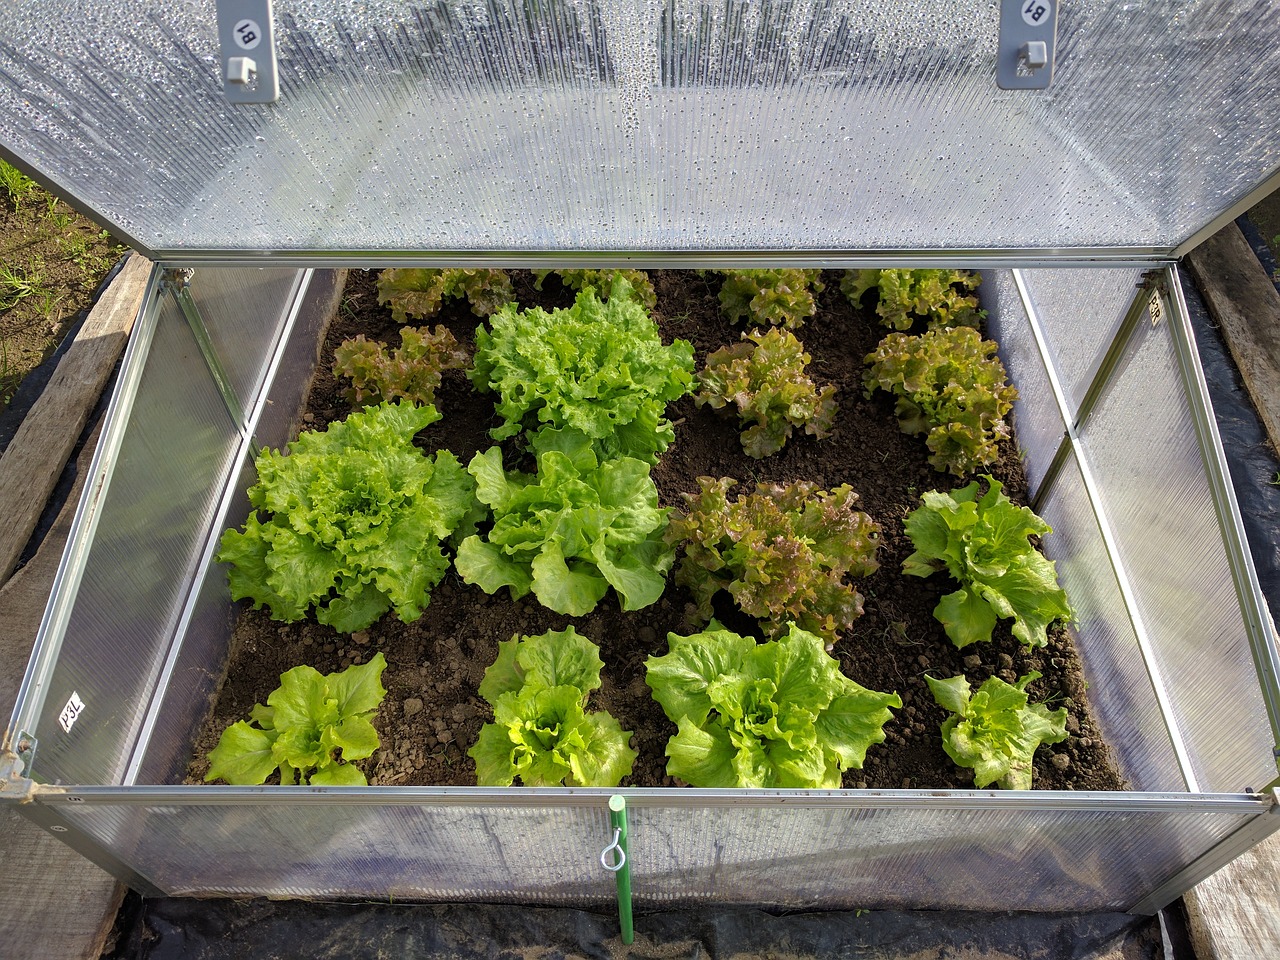 Small cold frame with lettuces.